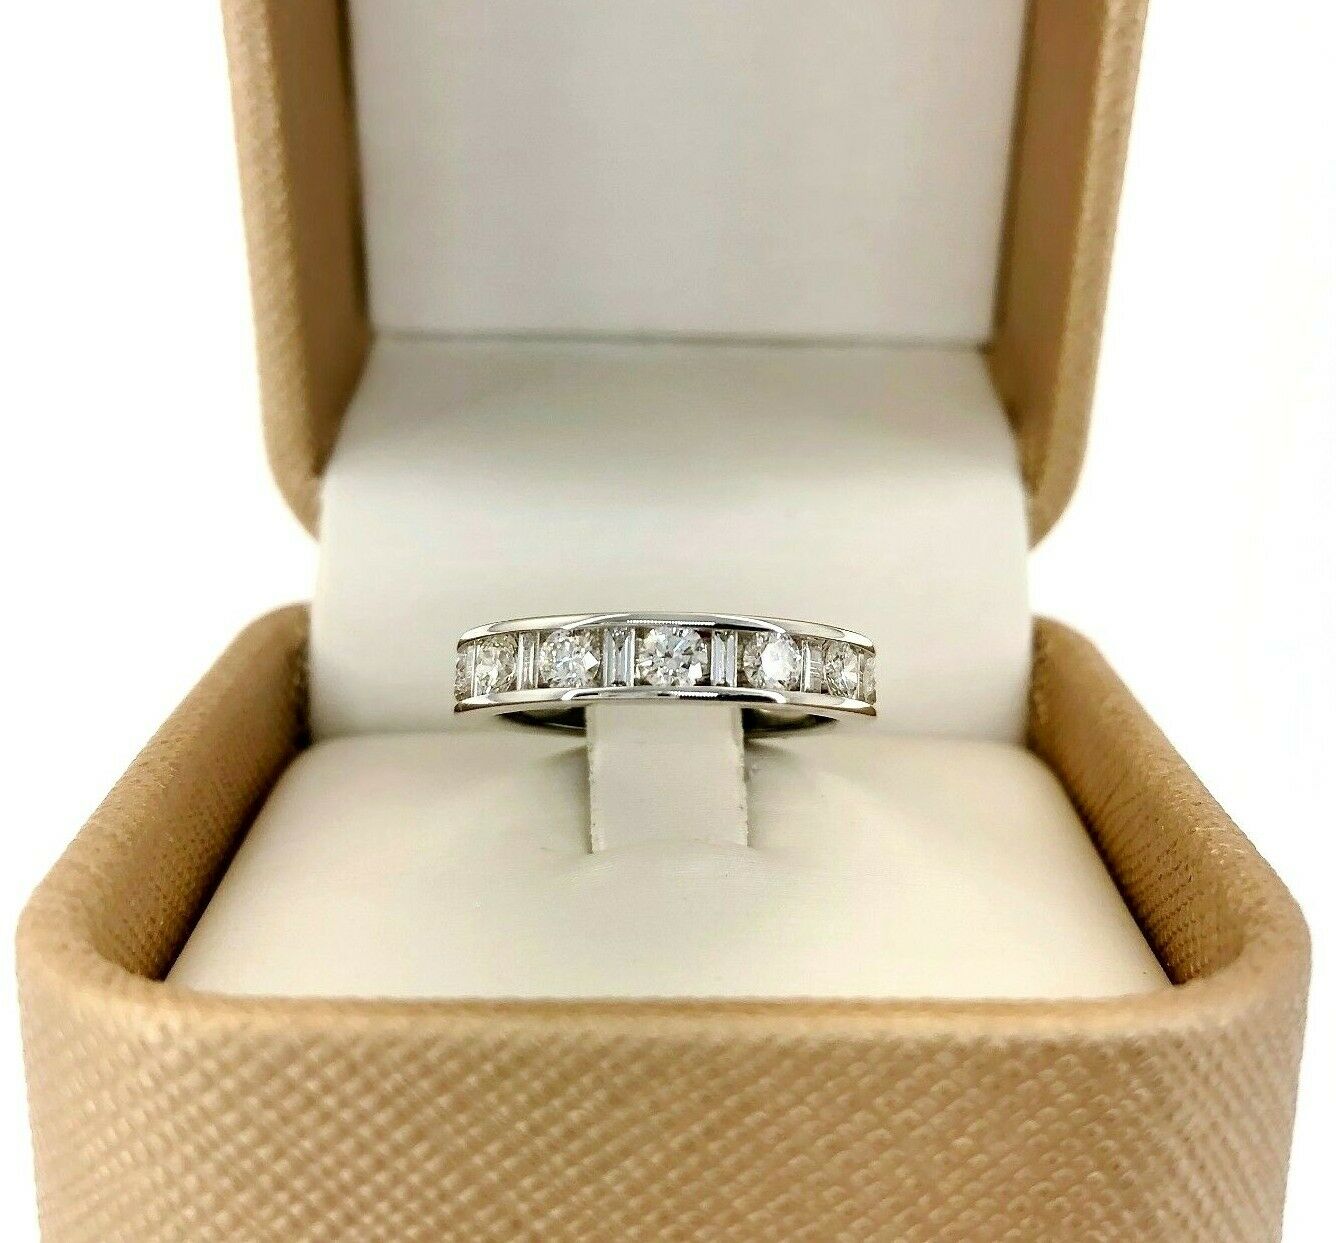 1.99 Carats Round & Baguette Diamond Anniversary Ring Eternity Ring Wedding Band